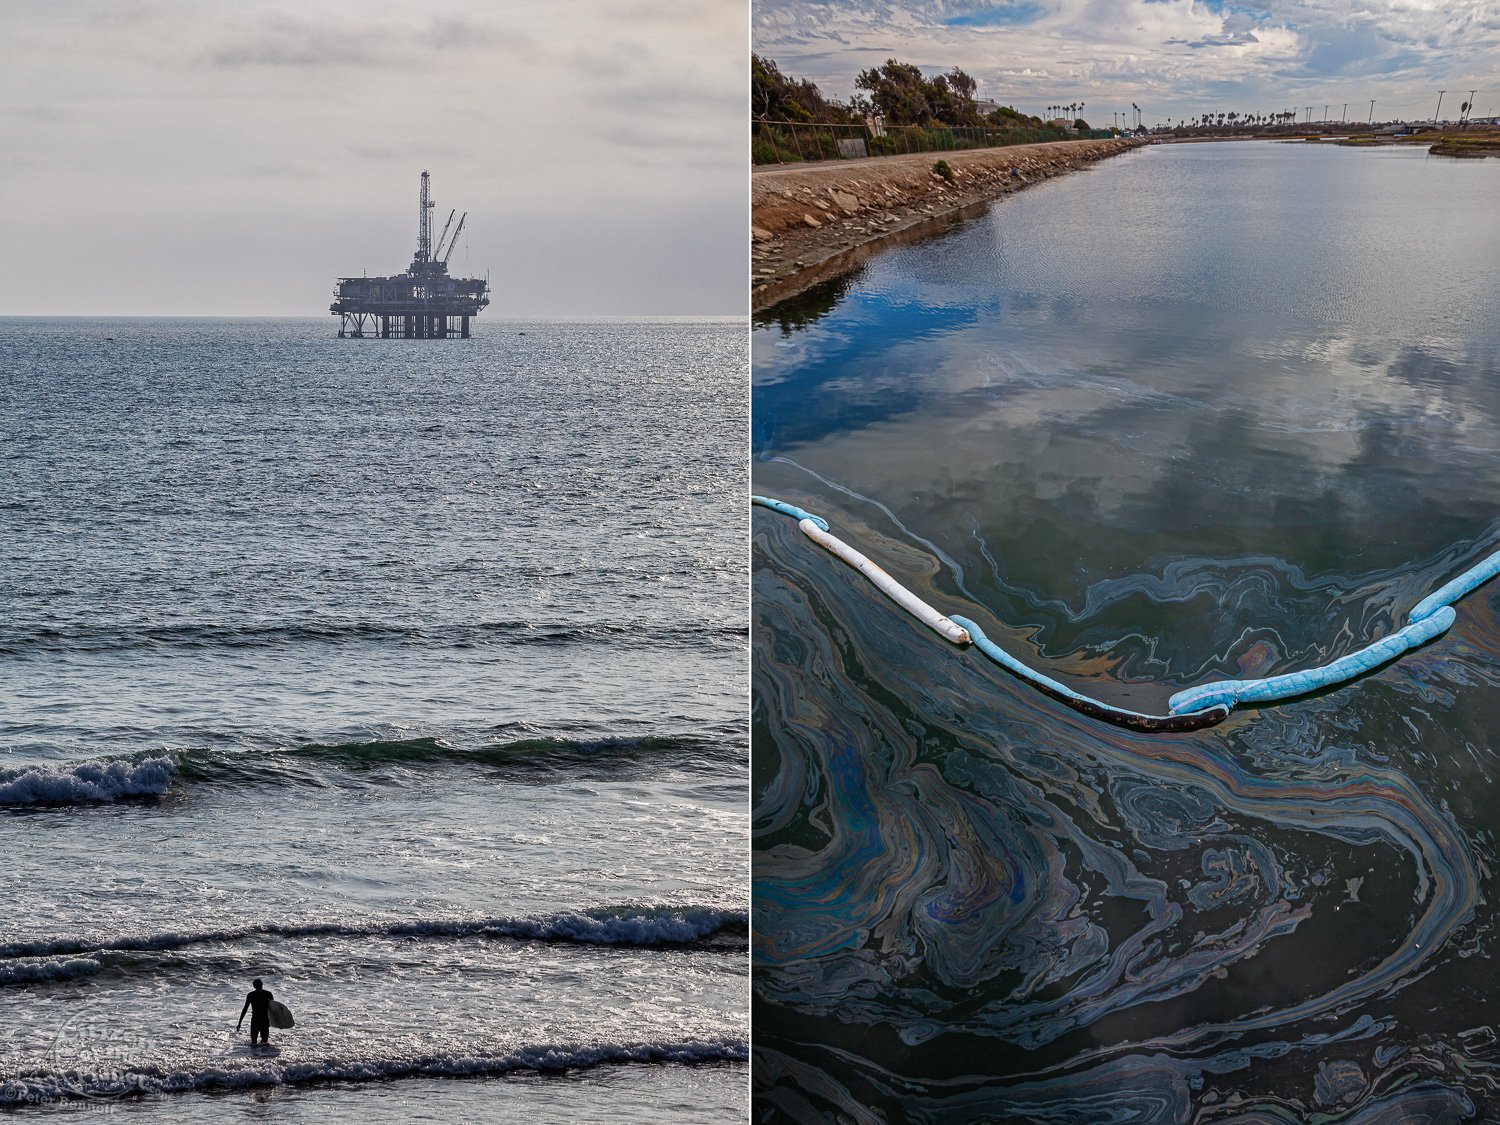  Oil Derrick and surfers off coast of Huntington Beach.   A boom blocks an oil slick in the Talbert Marsh after the Huntington Beach oil leak. 